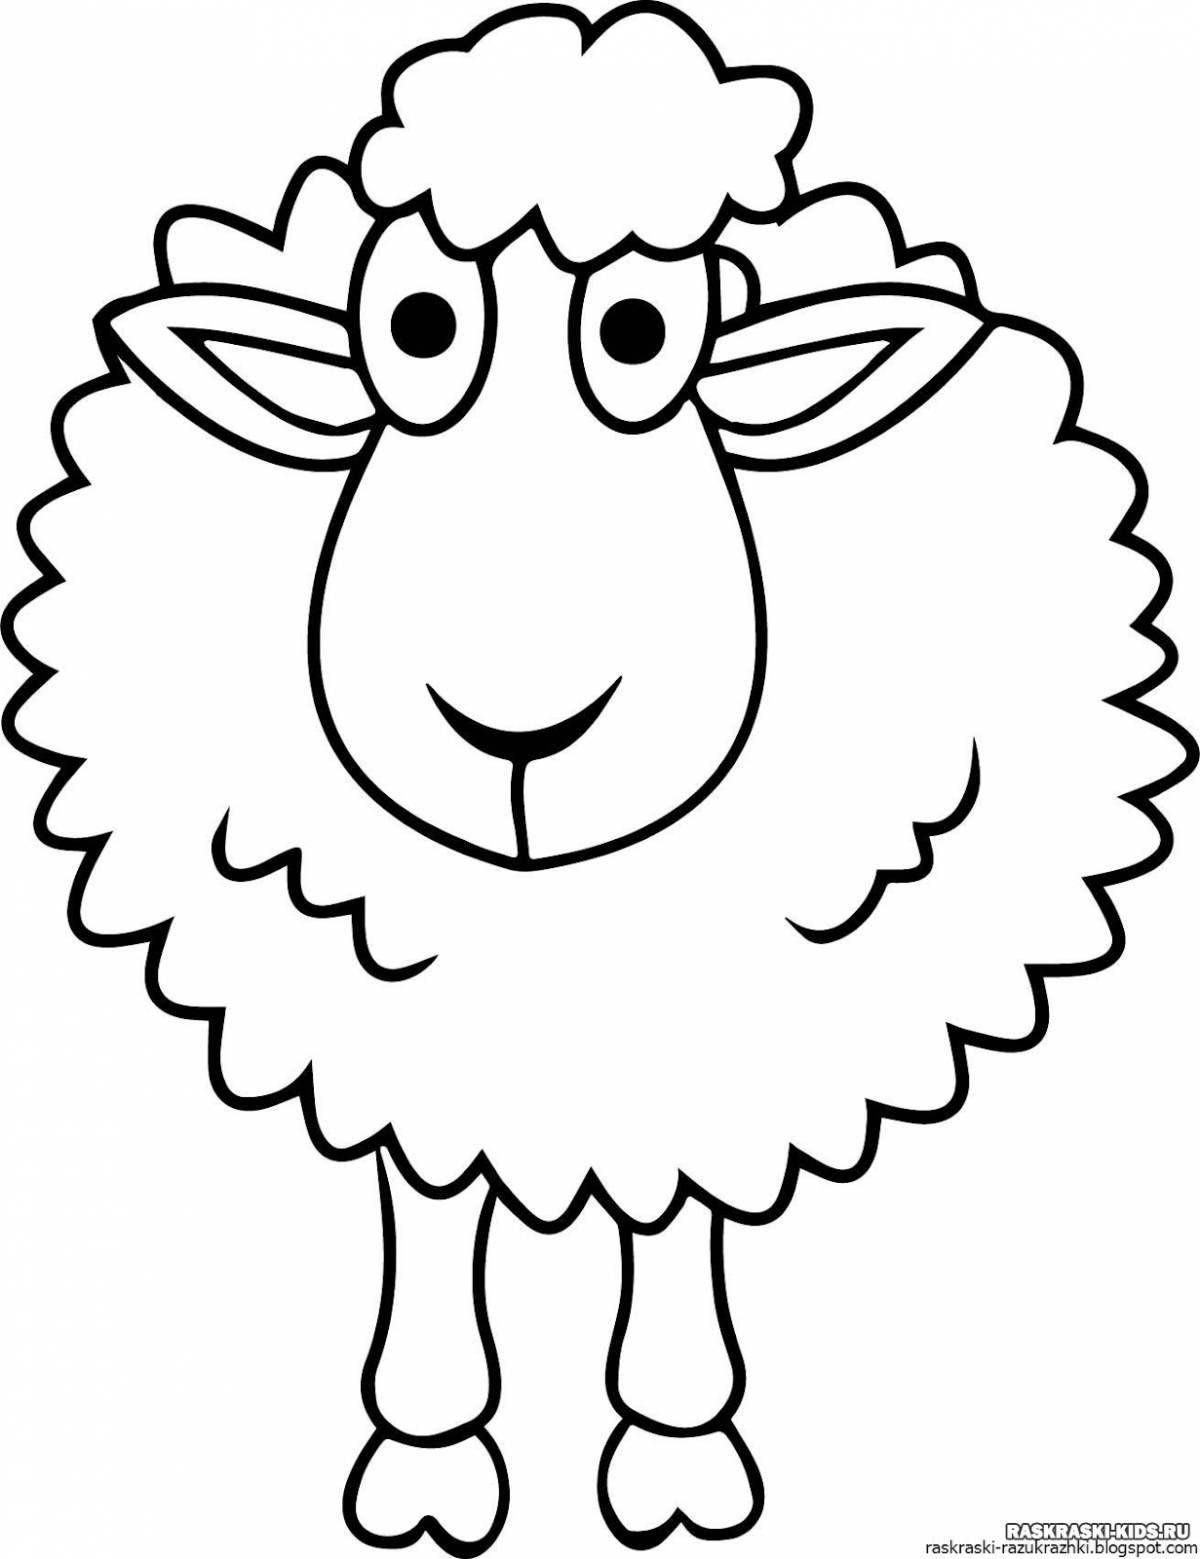 Bright coloring sheep for children 3-4 years old